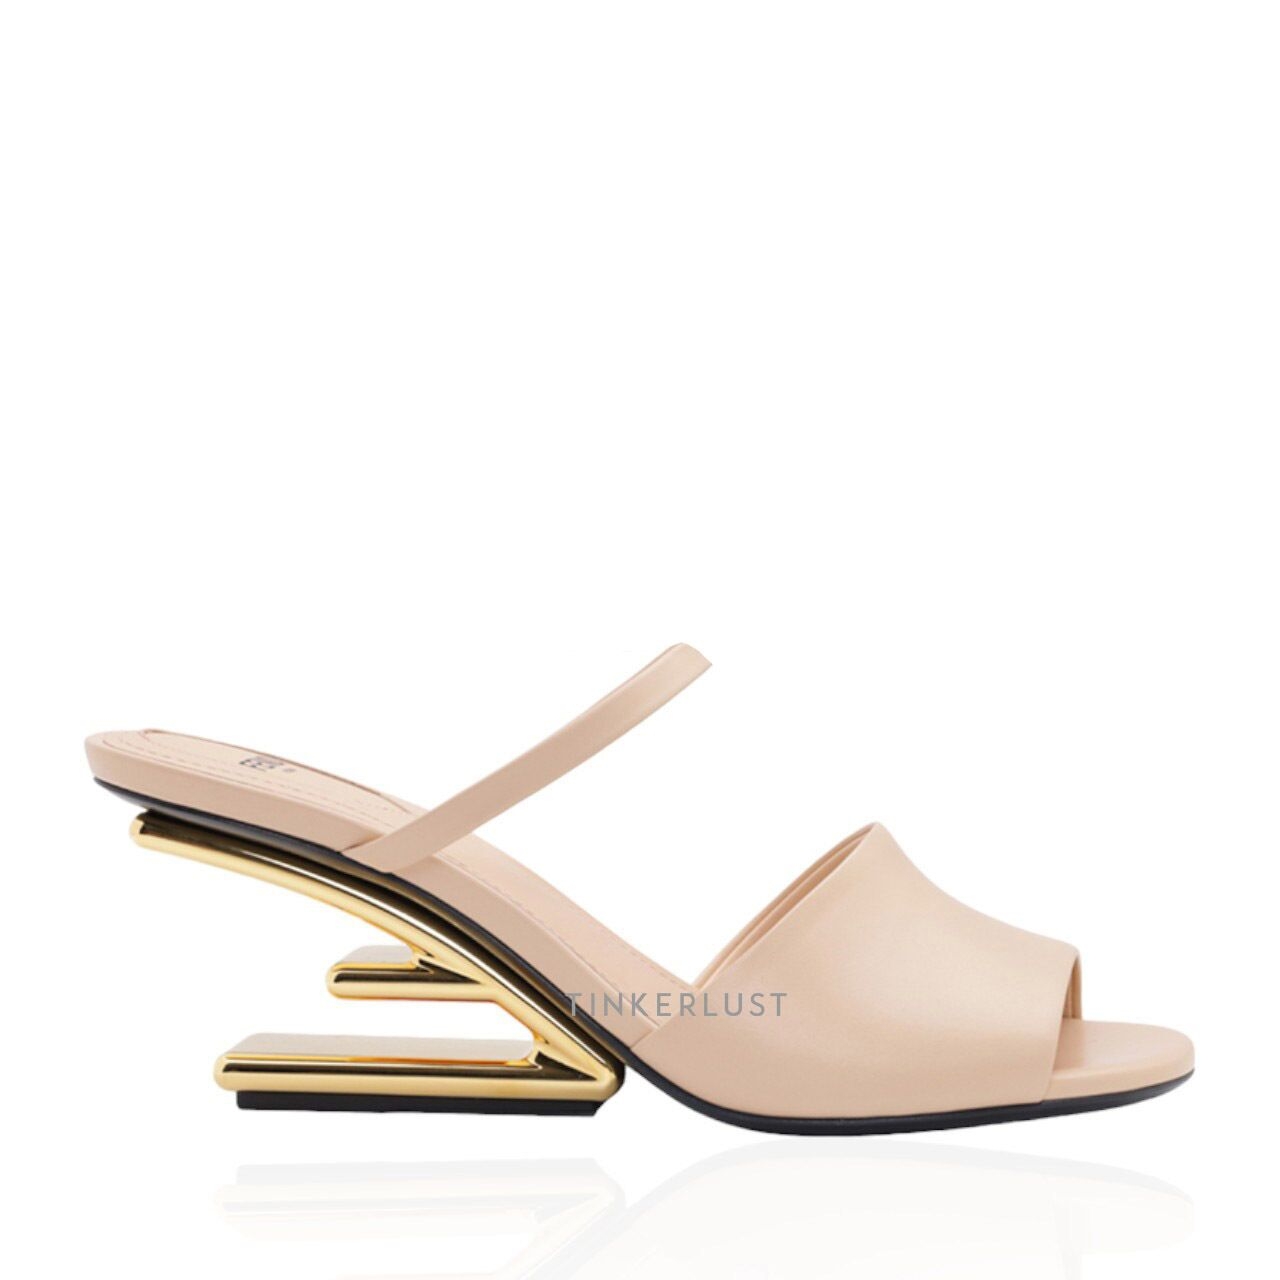 Fendi Women First Open Toe Sandals 65mm in Poudre Leather with Diagonal F-Shaped Heels